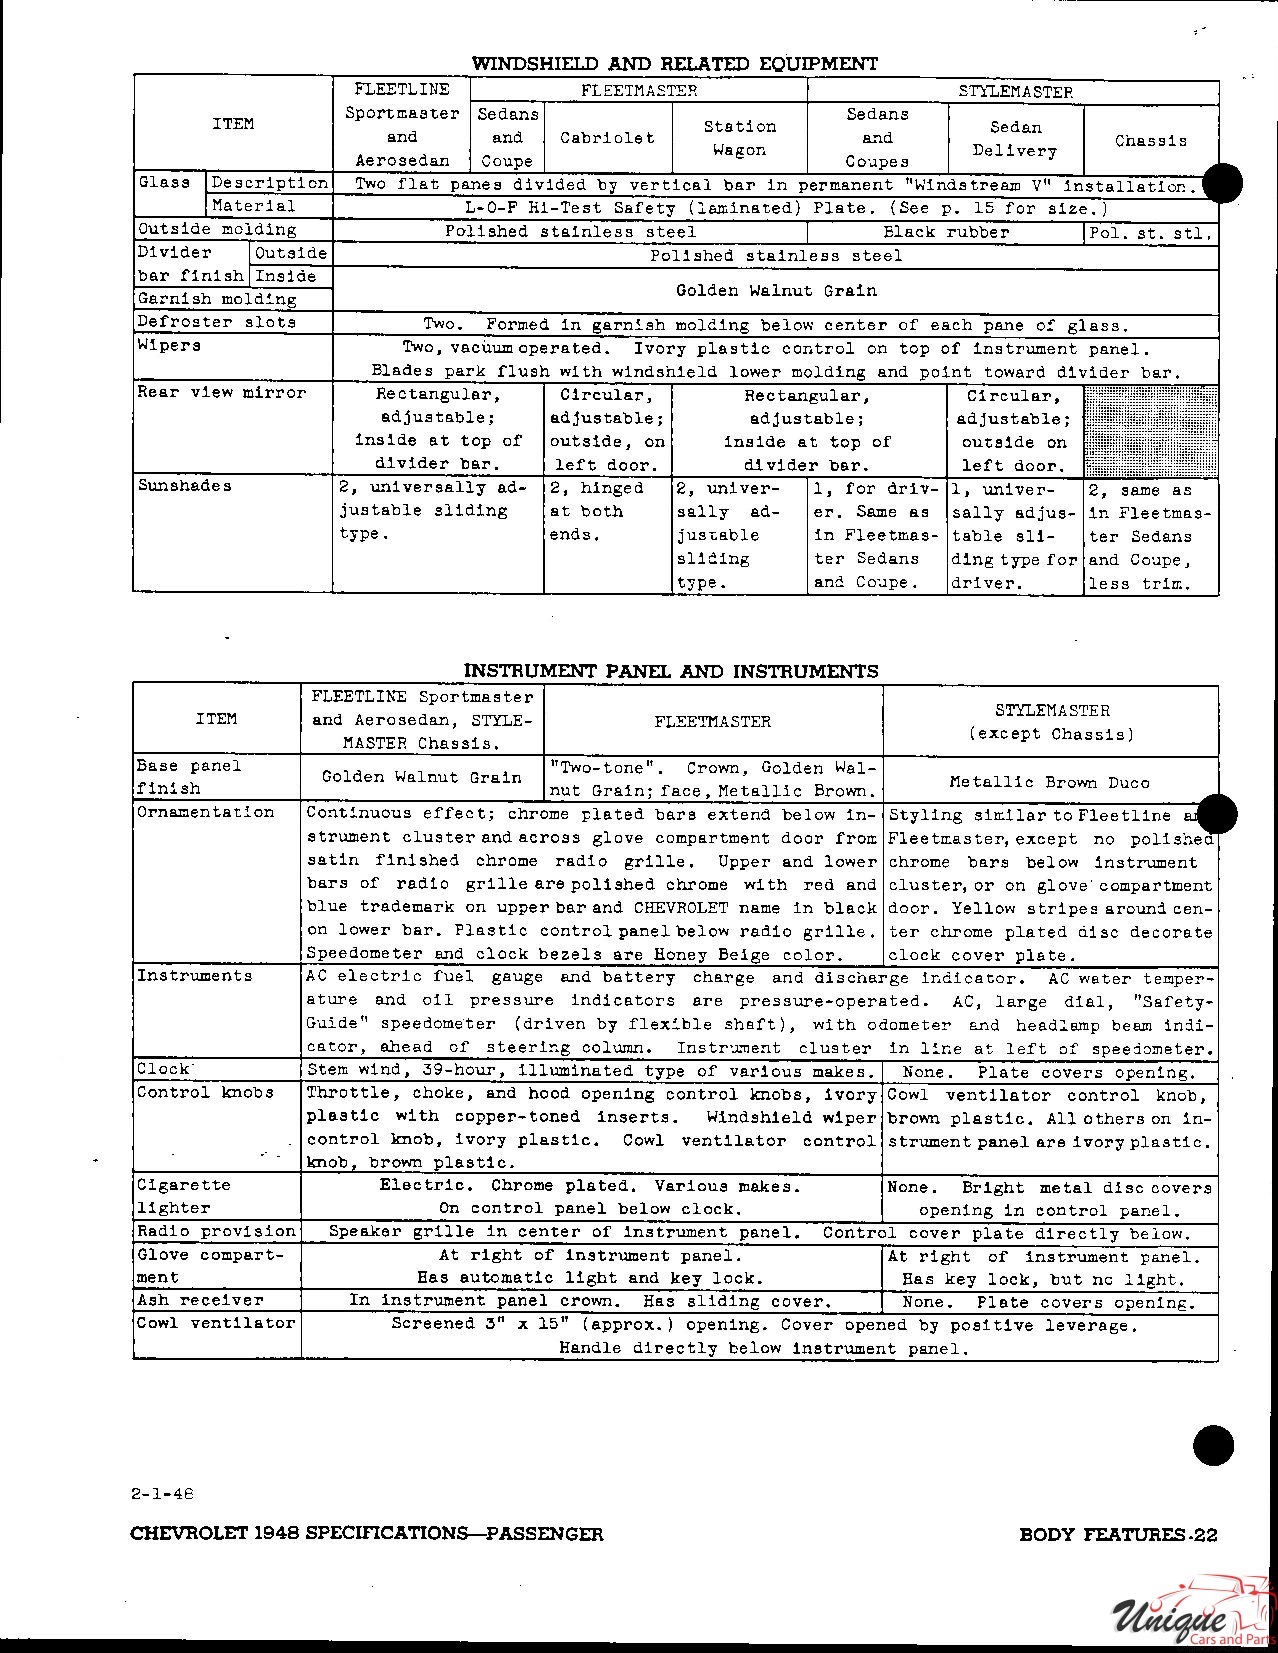 1948 Chevrolet Specifications Page 10